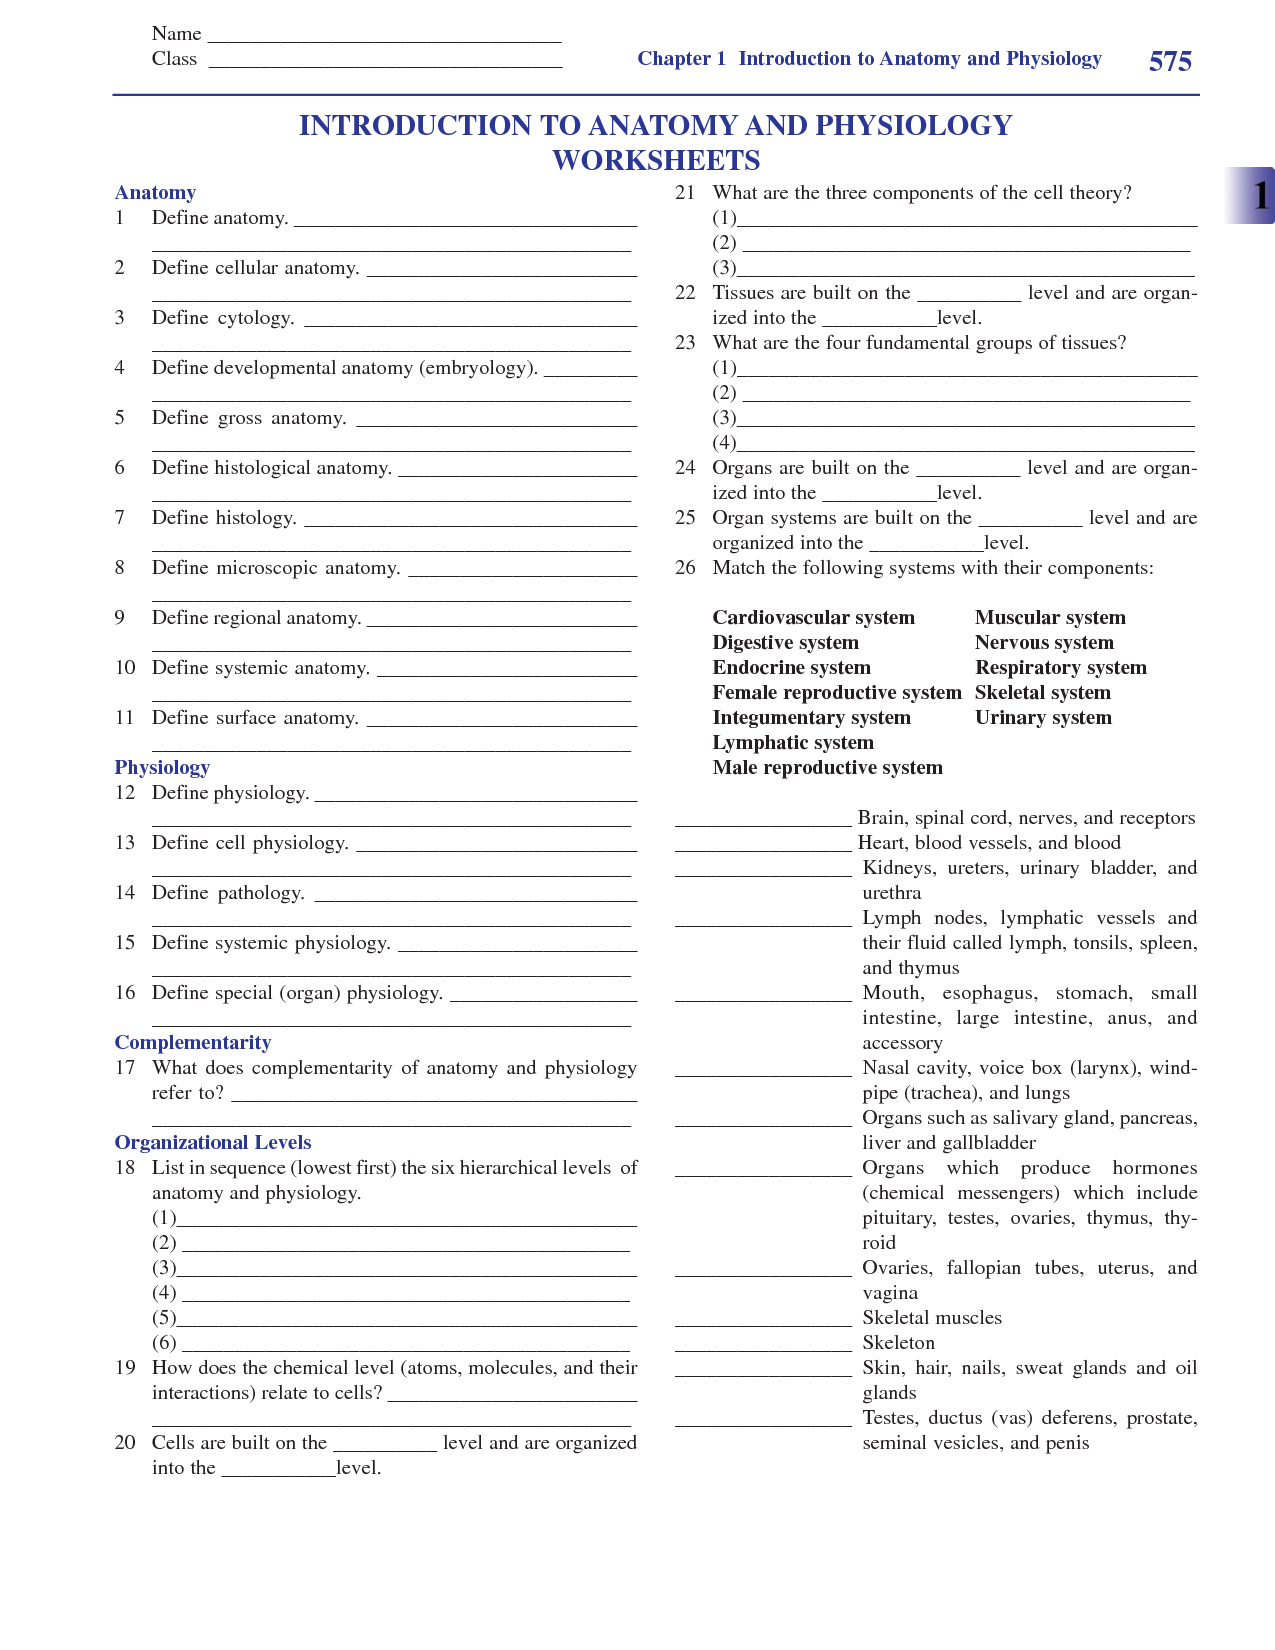 anatomy-and-physiology-worksheets-printable